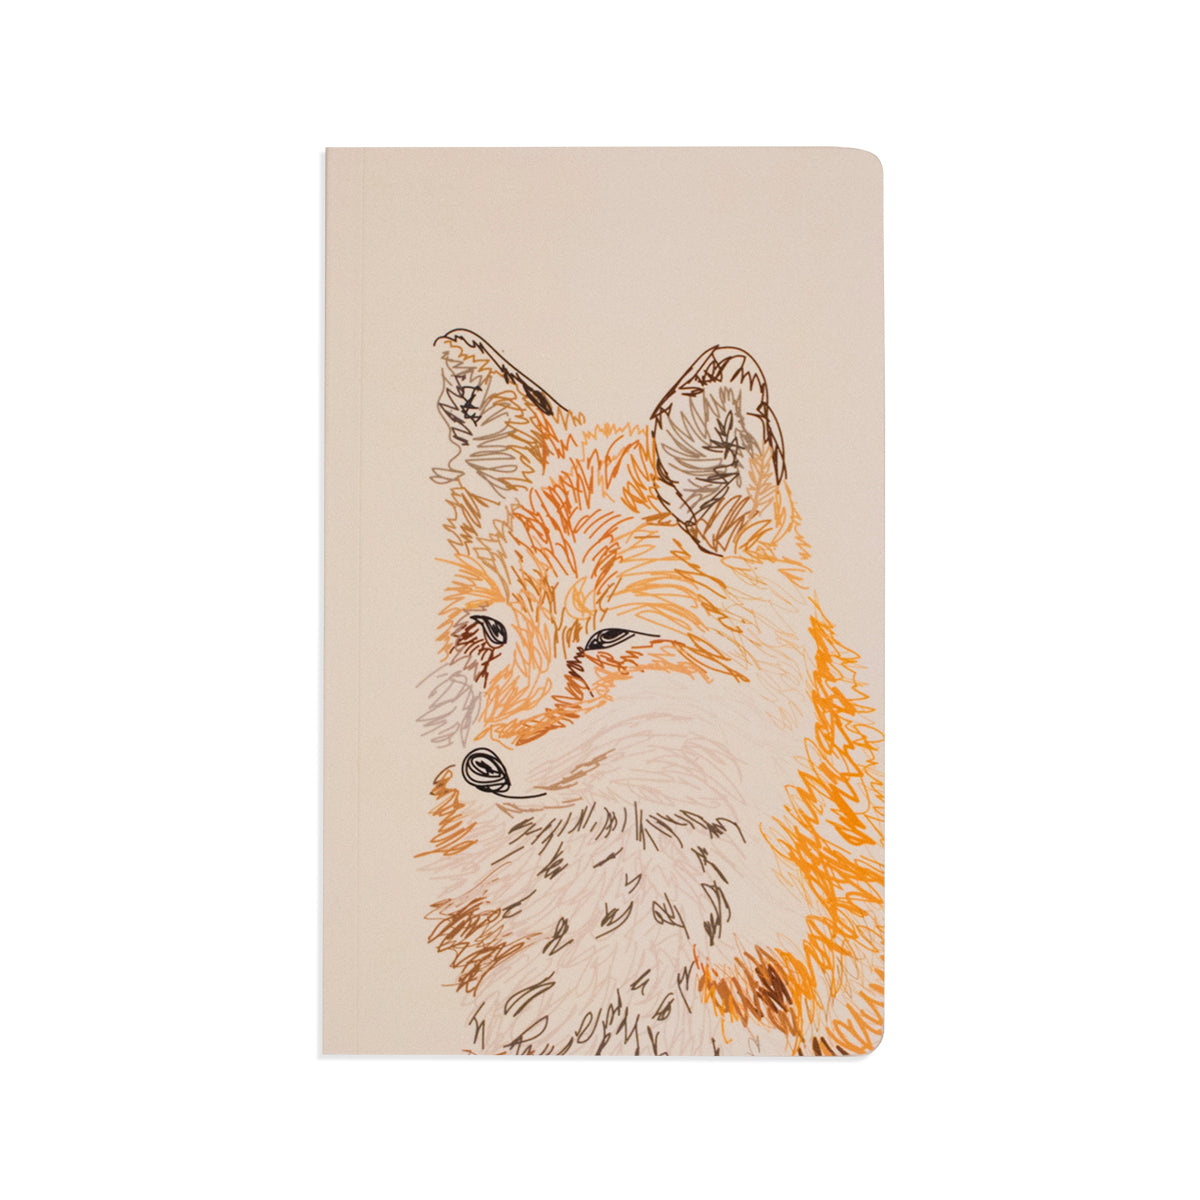 5" x 8.25" soft cover notebook in beige featuring large hand sketched illustration of a fox in the middle